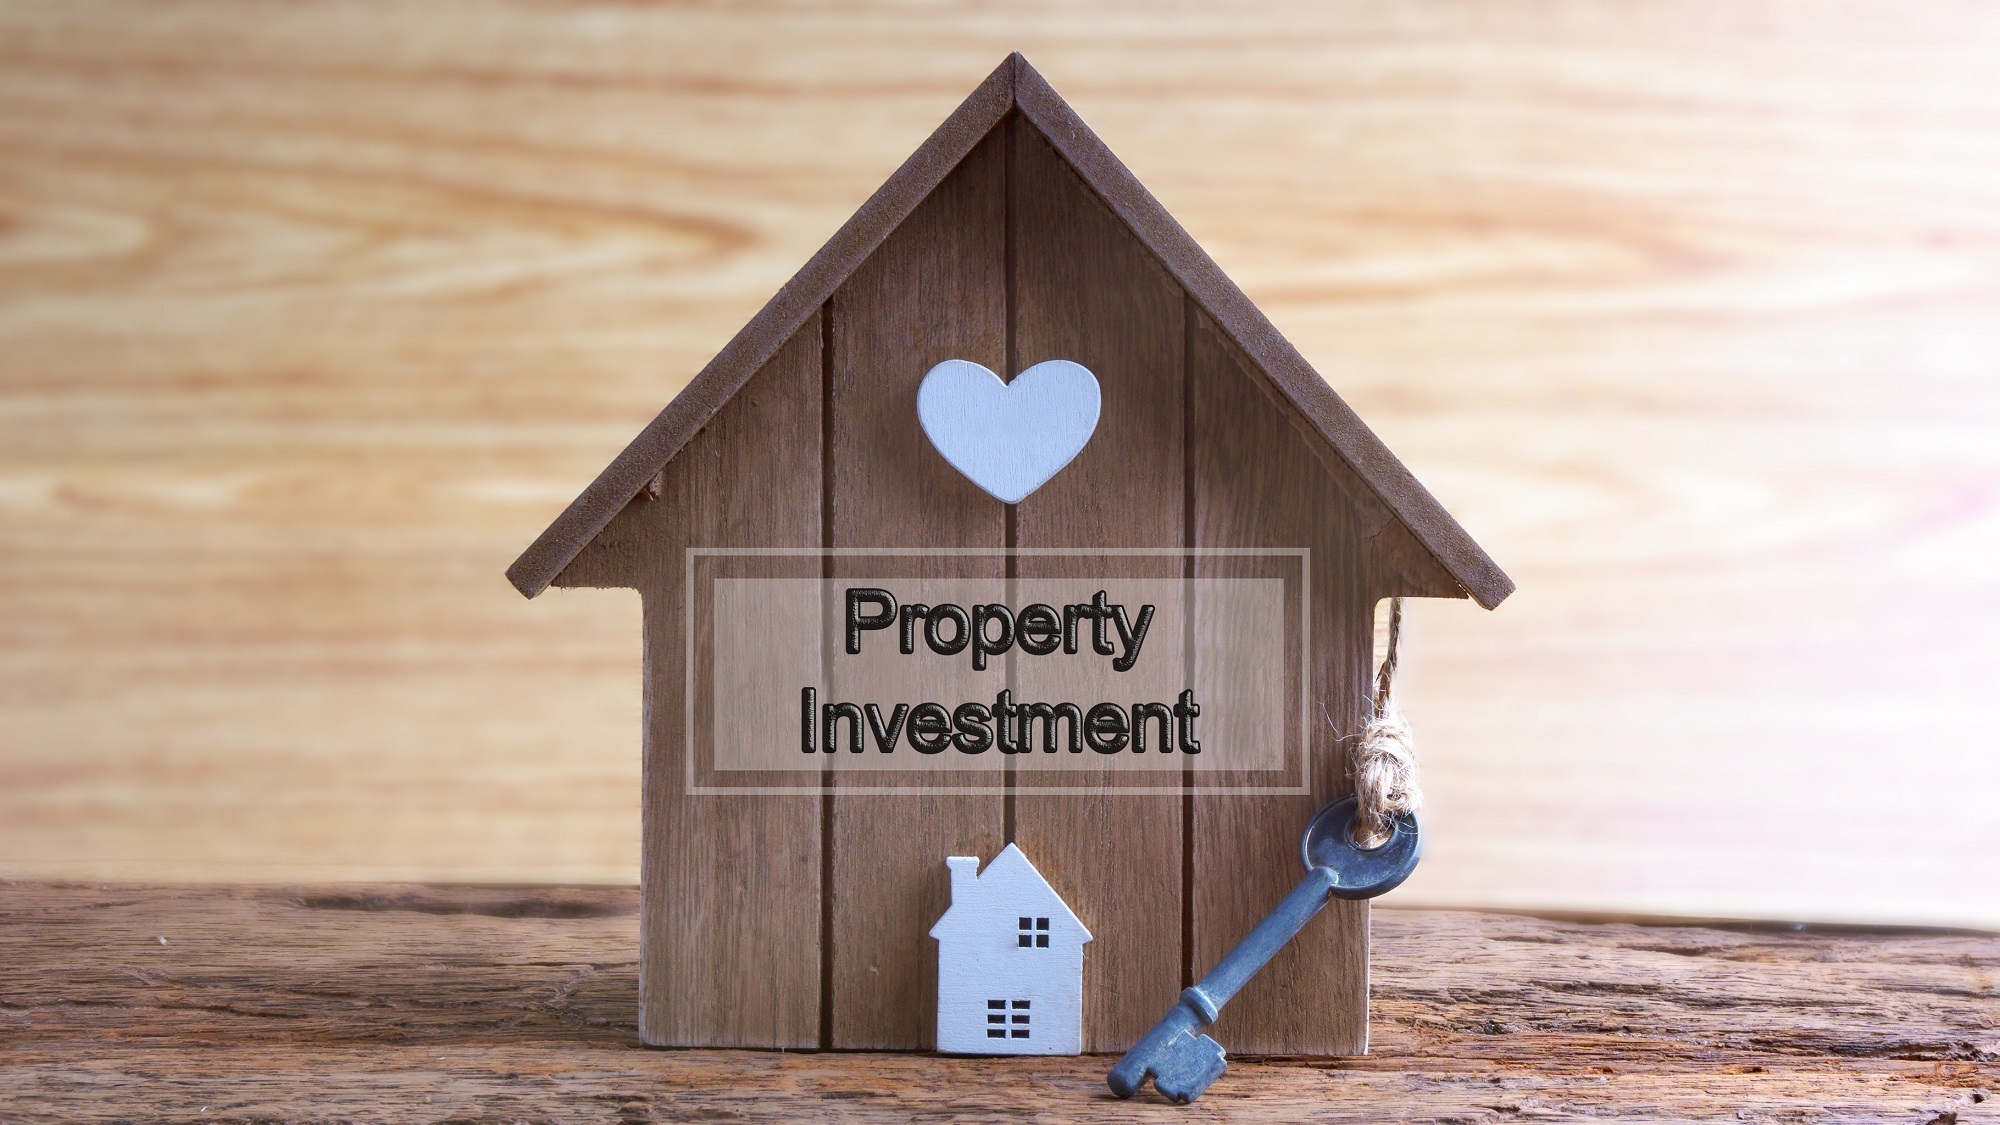 property-investment